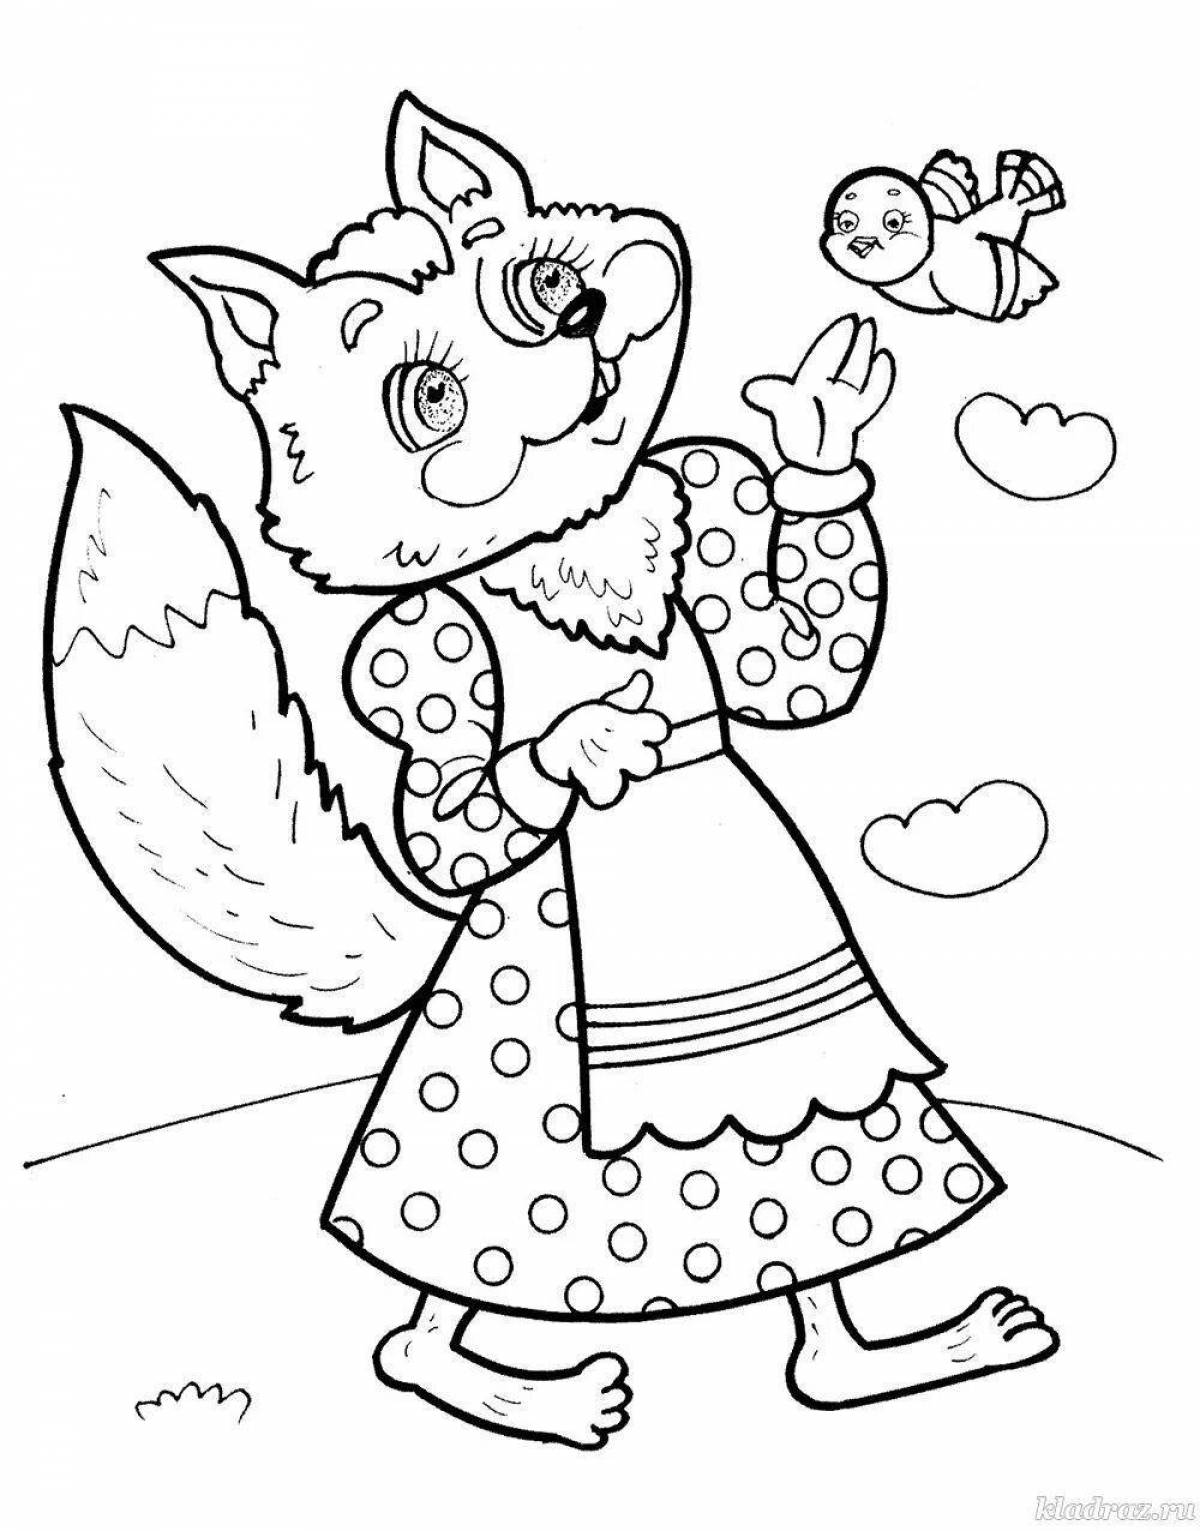 Cute fox coloring book for 3-4 year olds